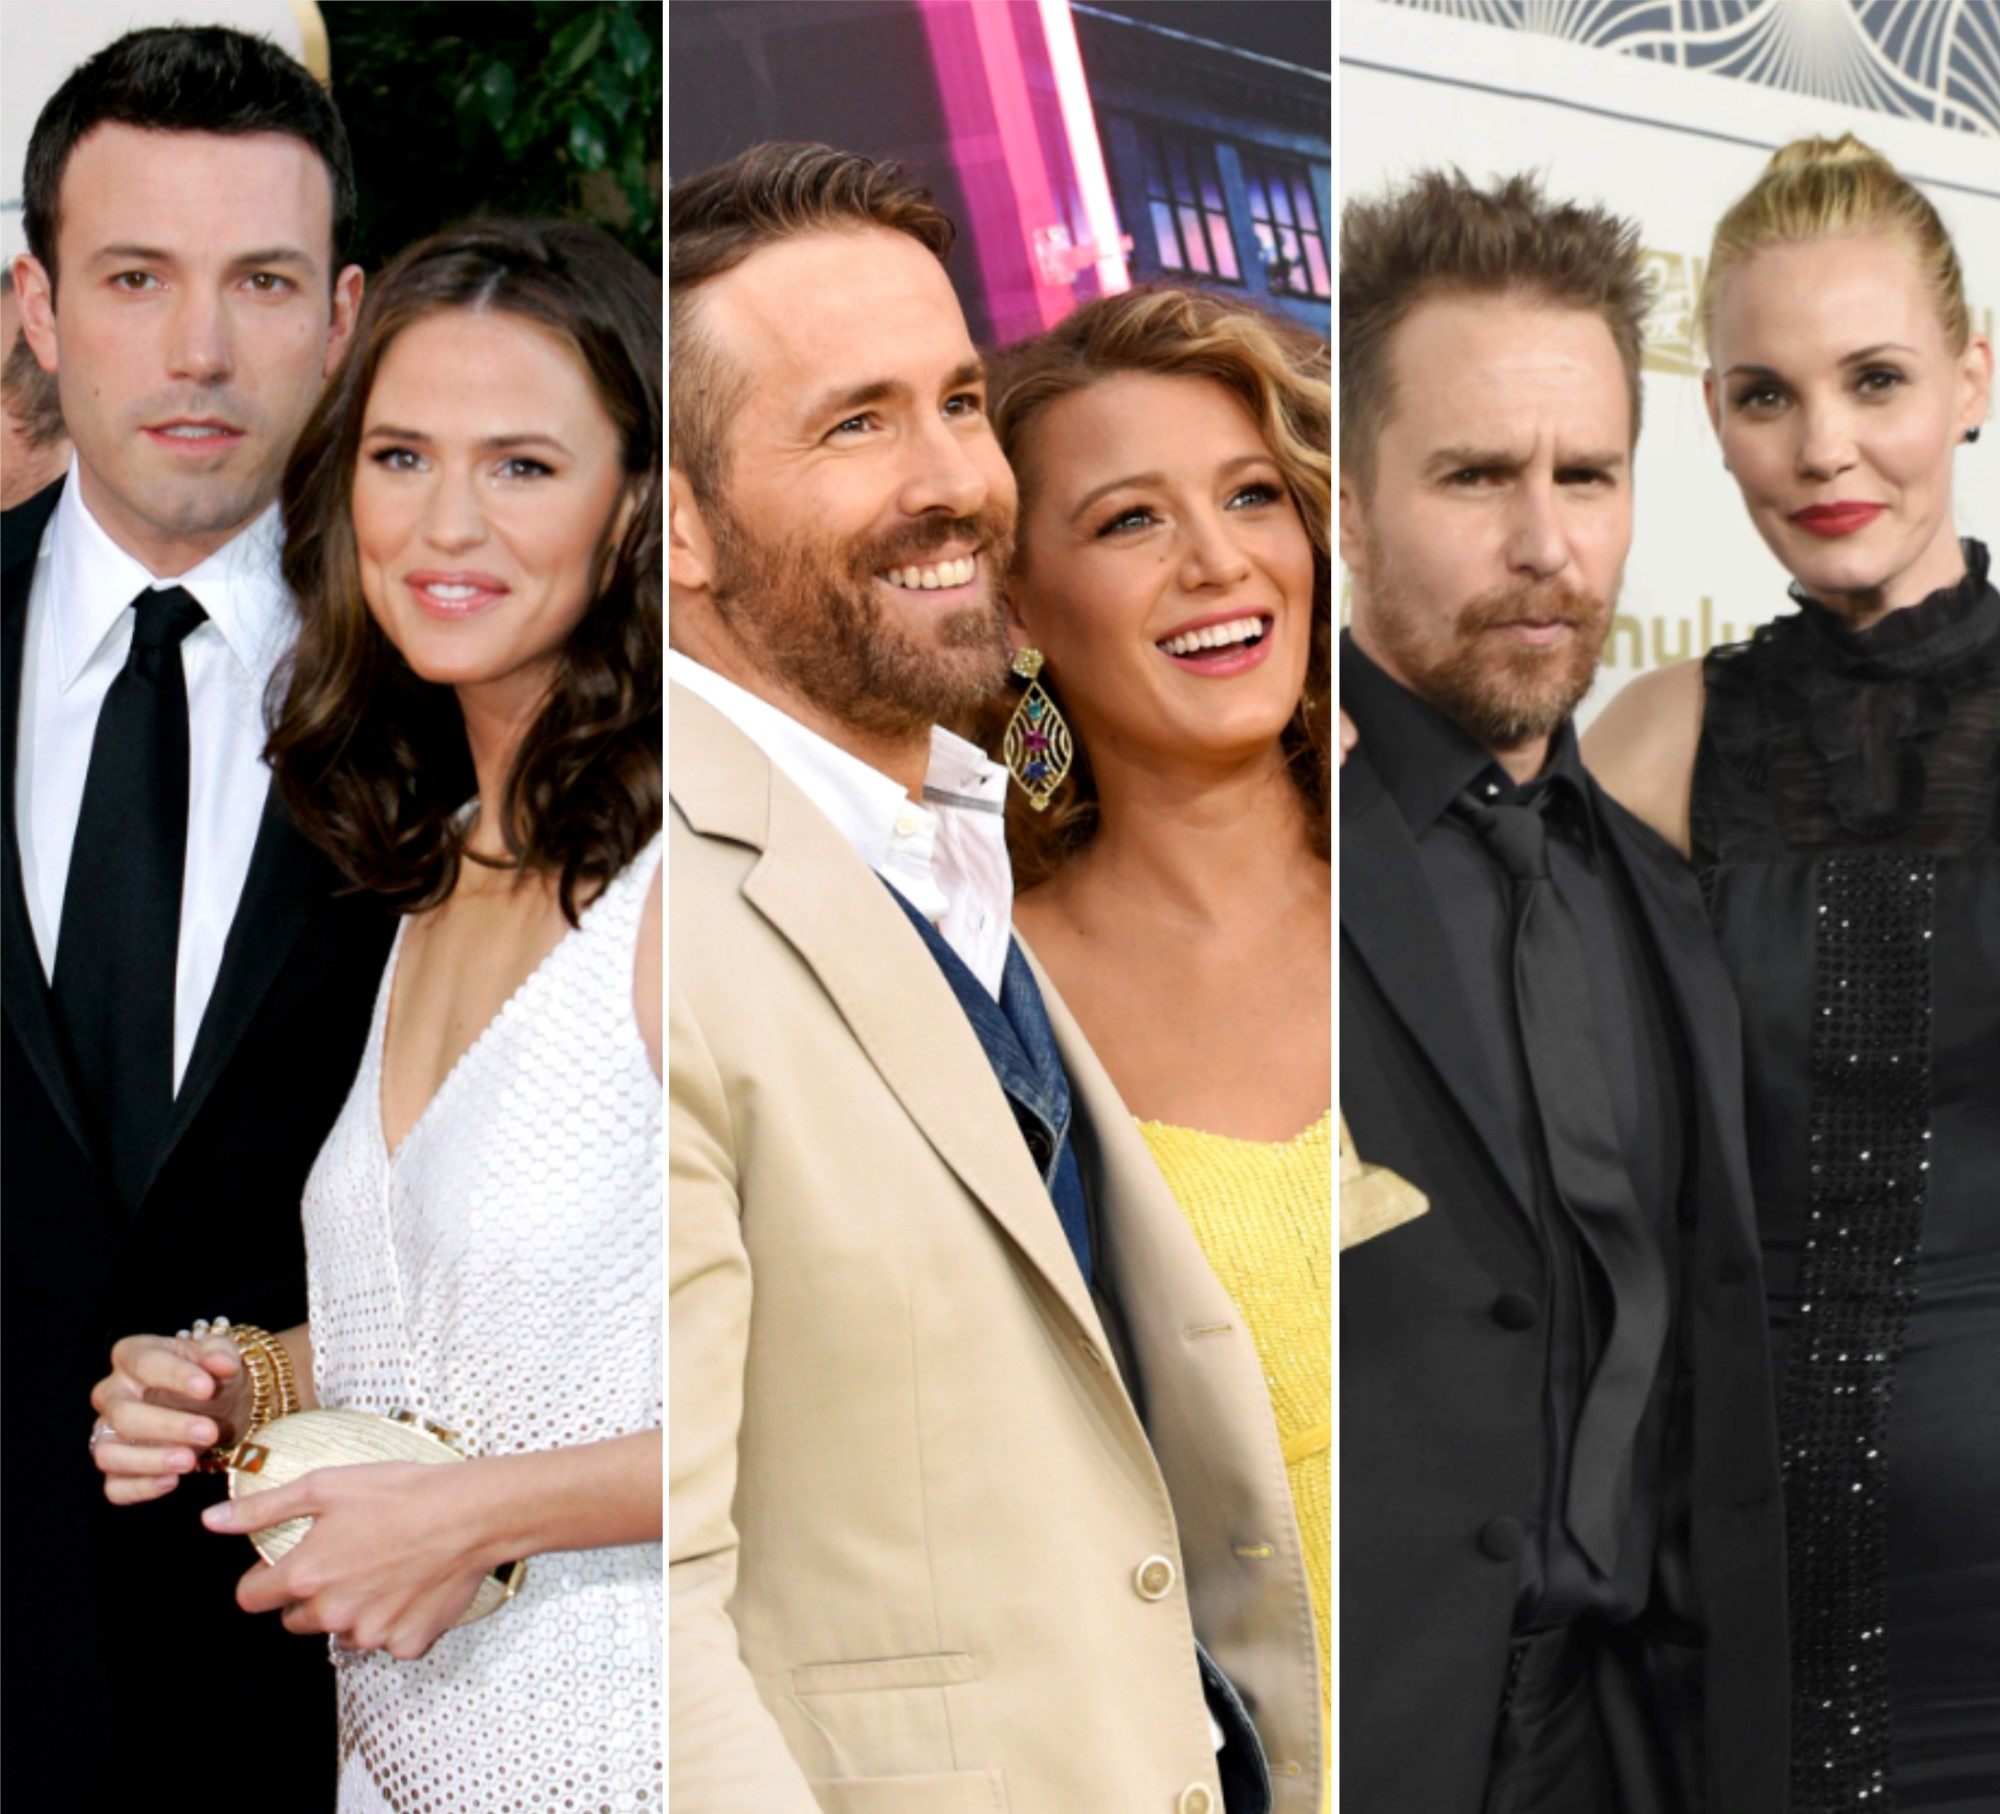 Ben Affleck and Jennifer Garner, Ryan Reynolds and Blake Lively, and Sam Rockwell and Leslie Bibb all played couples in Marvel or DC films ... and dated or even got married in real life too. Photos: AP Photo, Getty Images/AFP